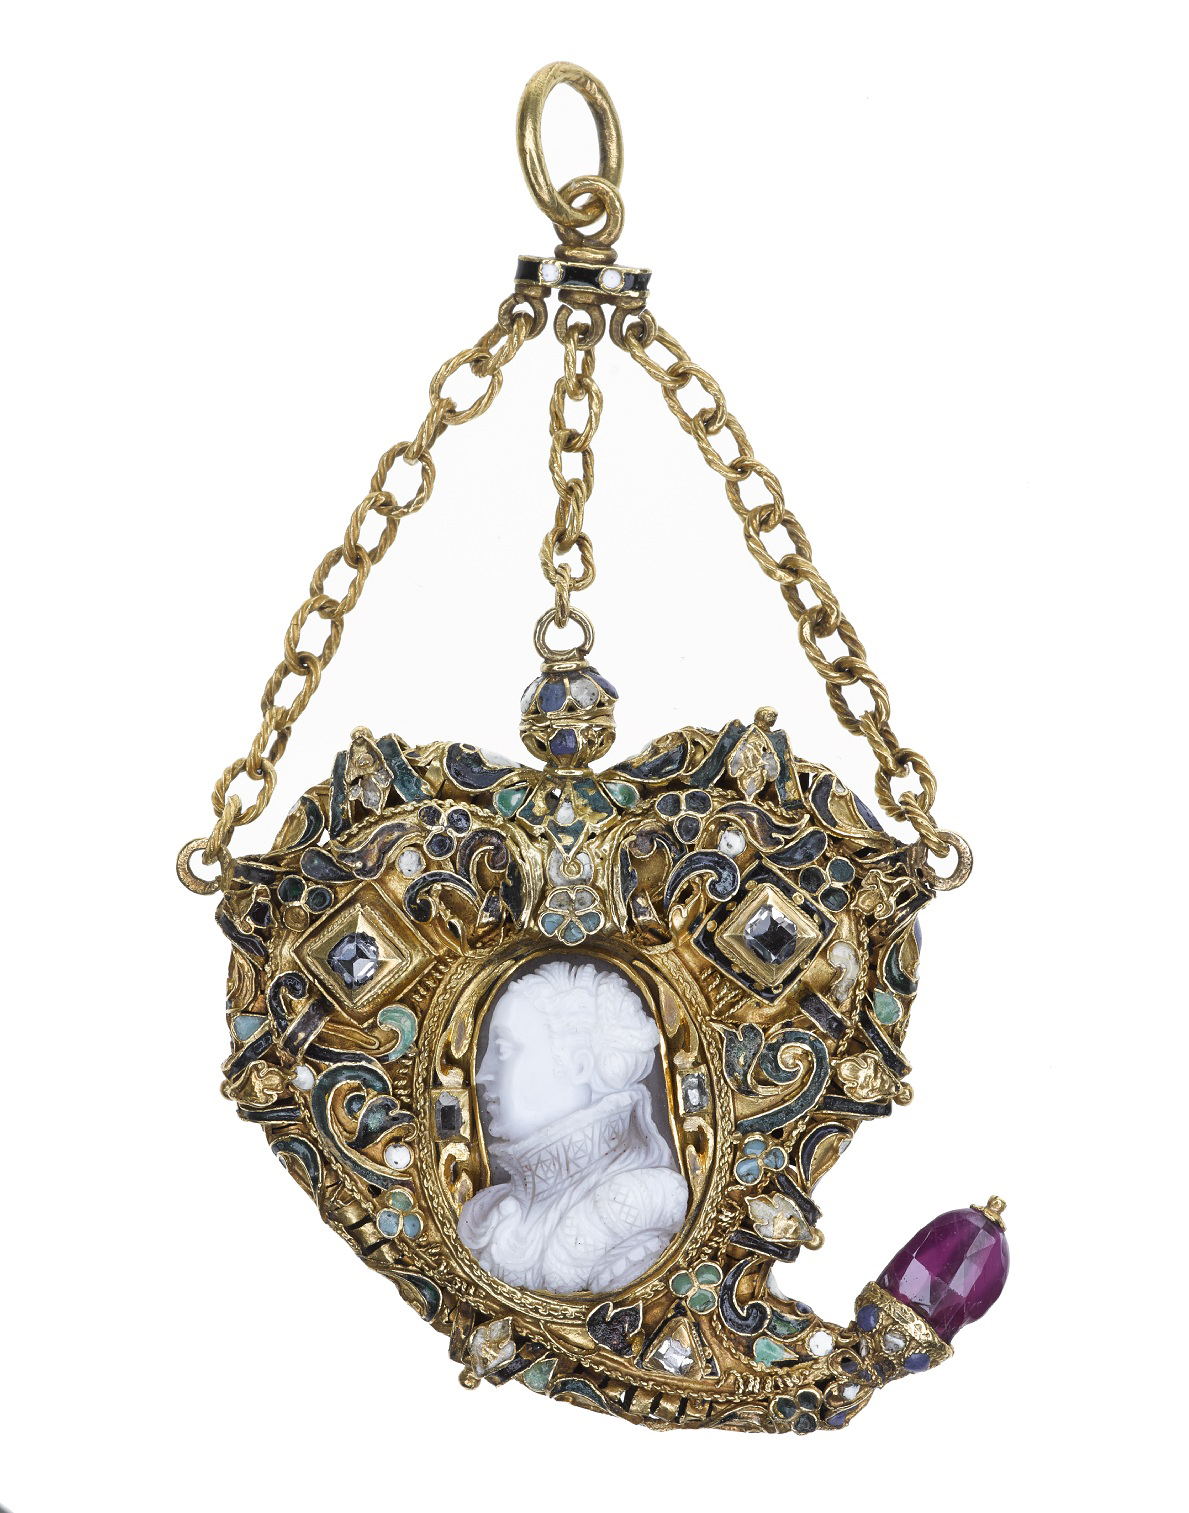 Heart-shaped locket set with a cameo of Mary, Queen of Scots